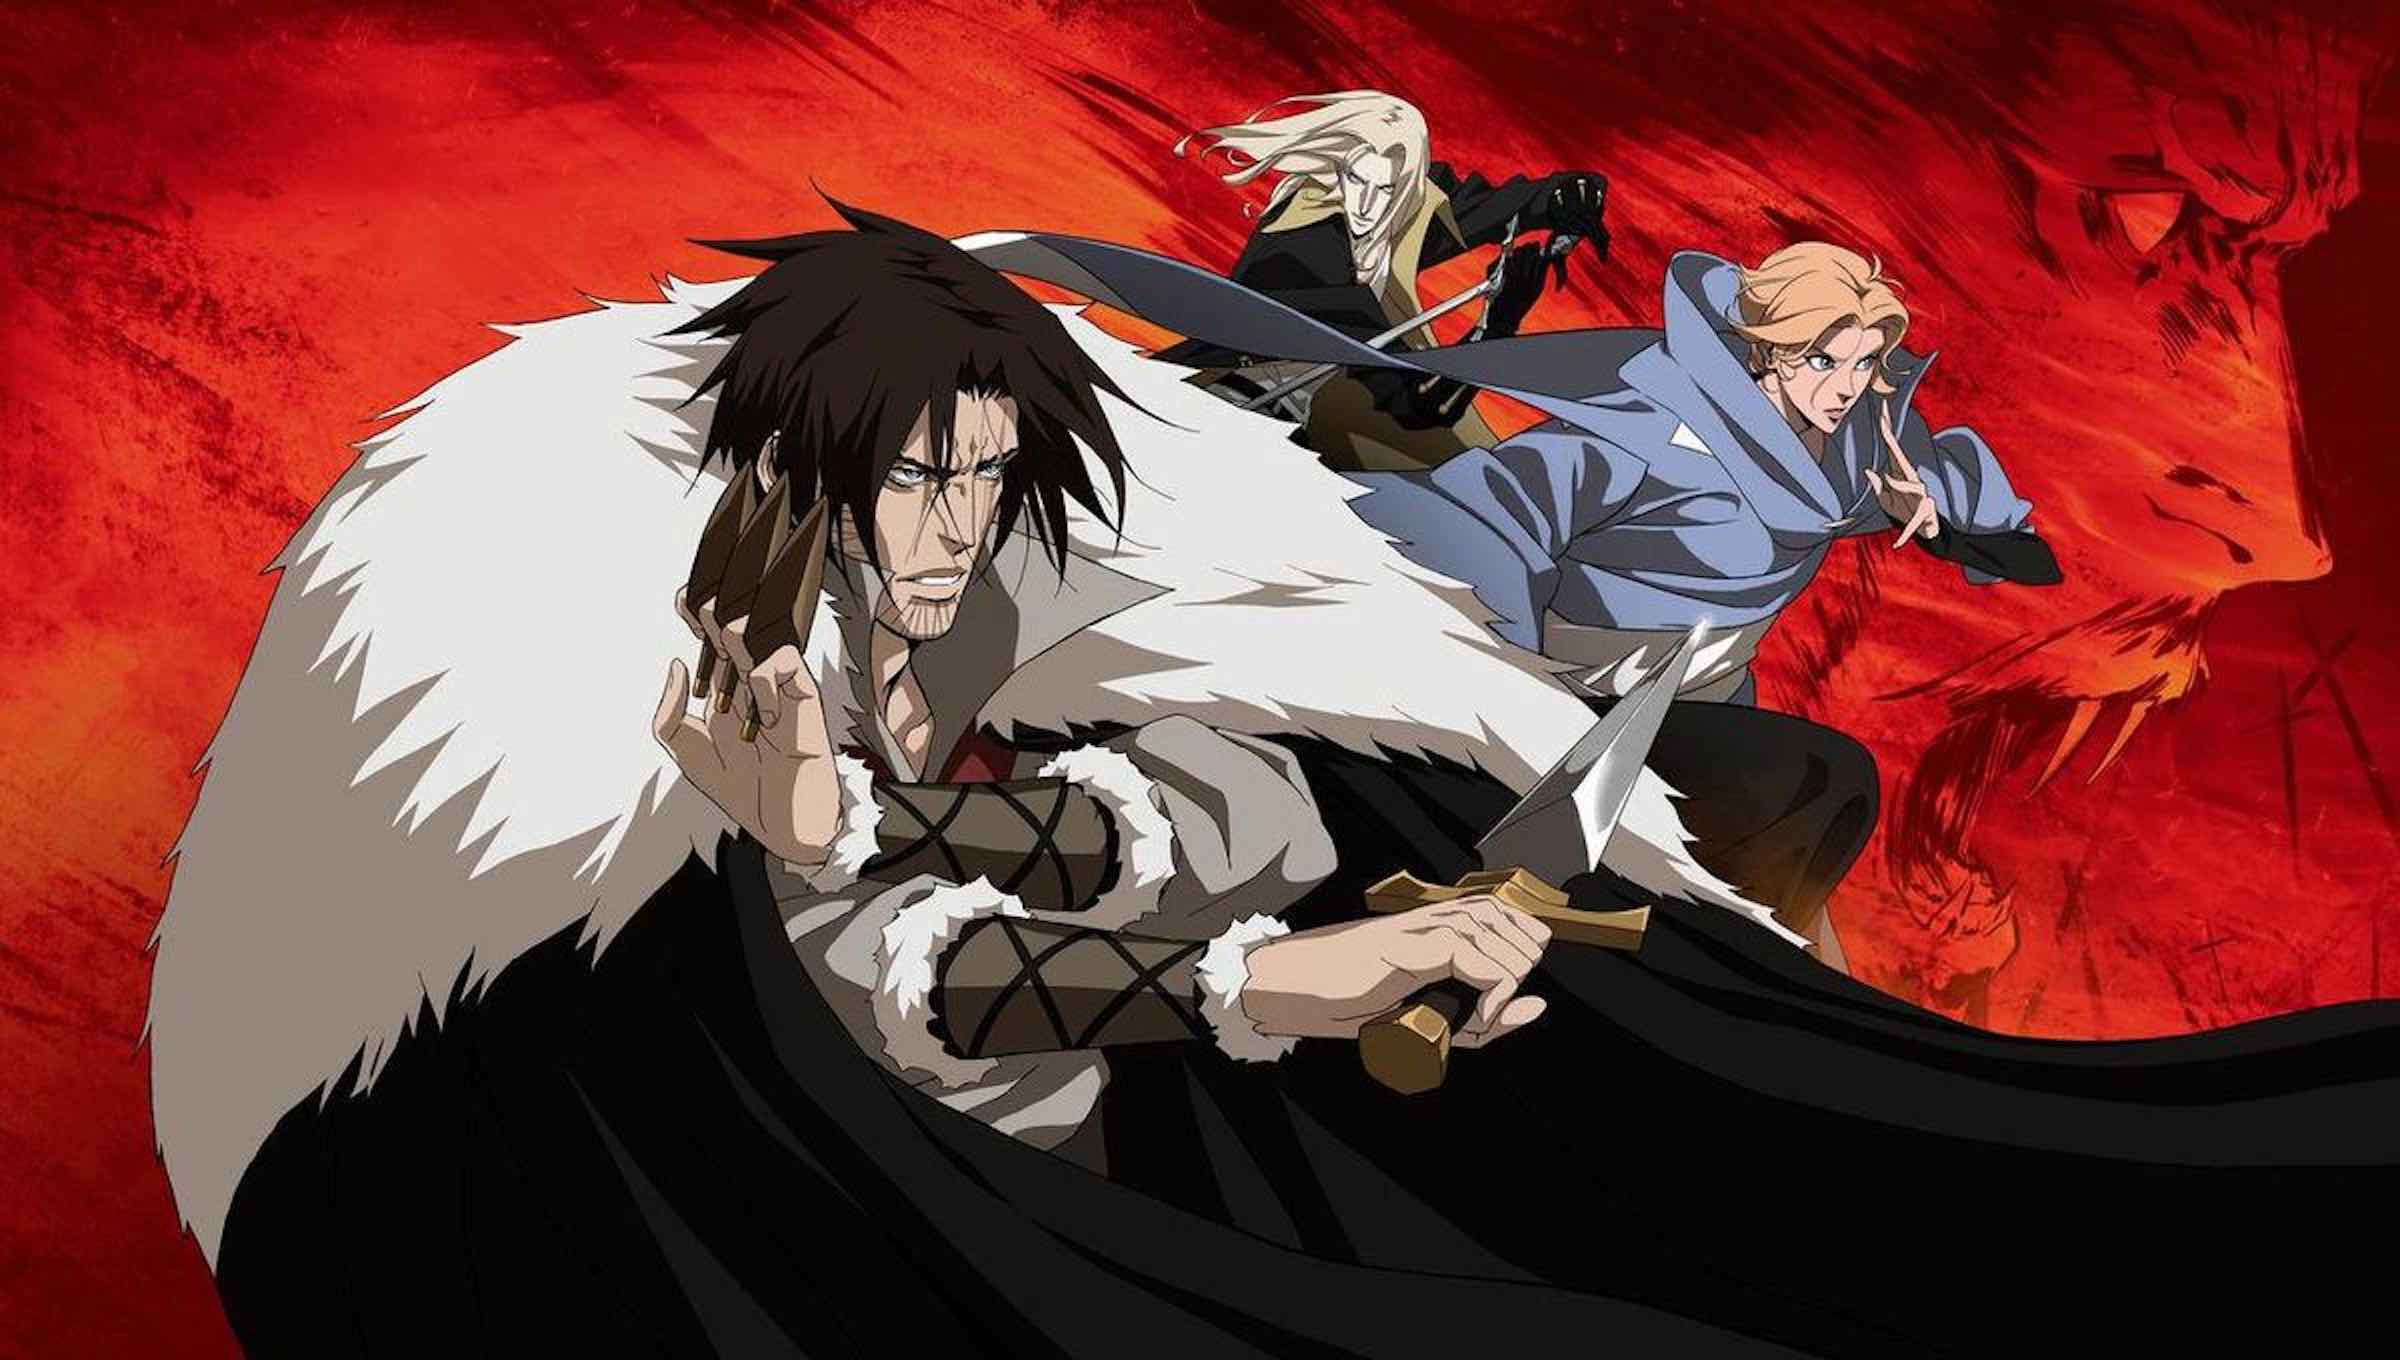 Image shows main characters from the show Castlevania 